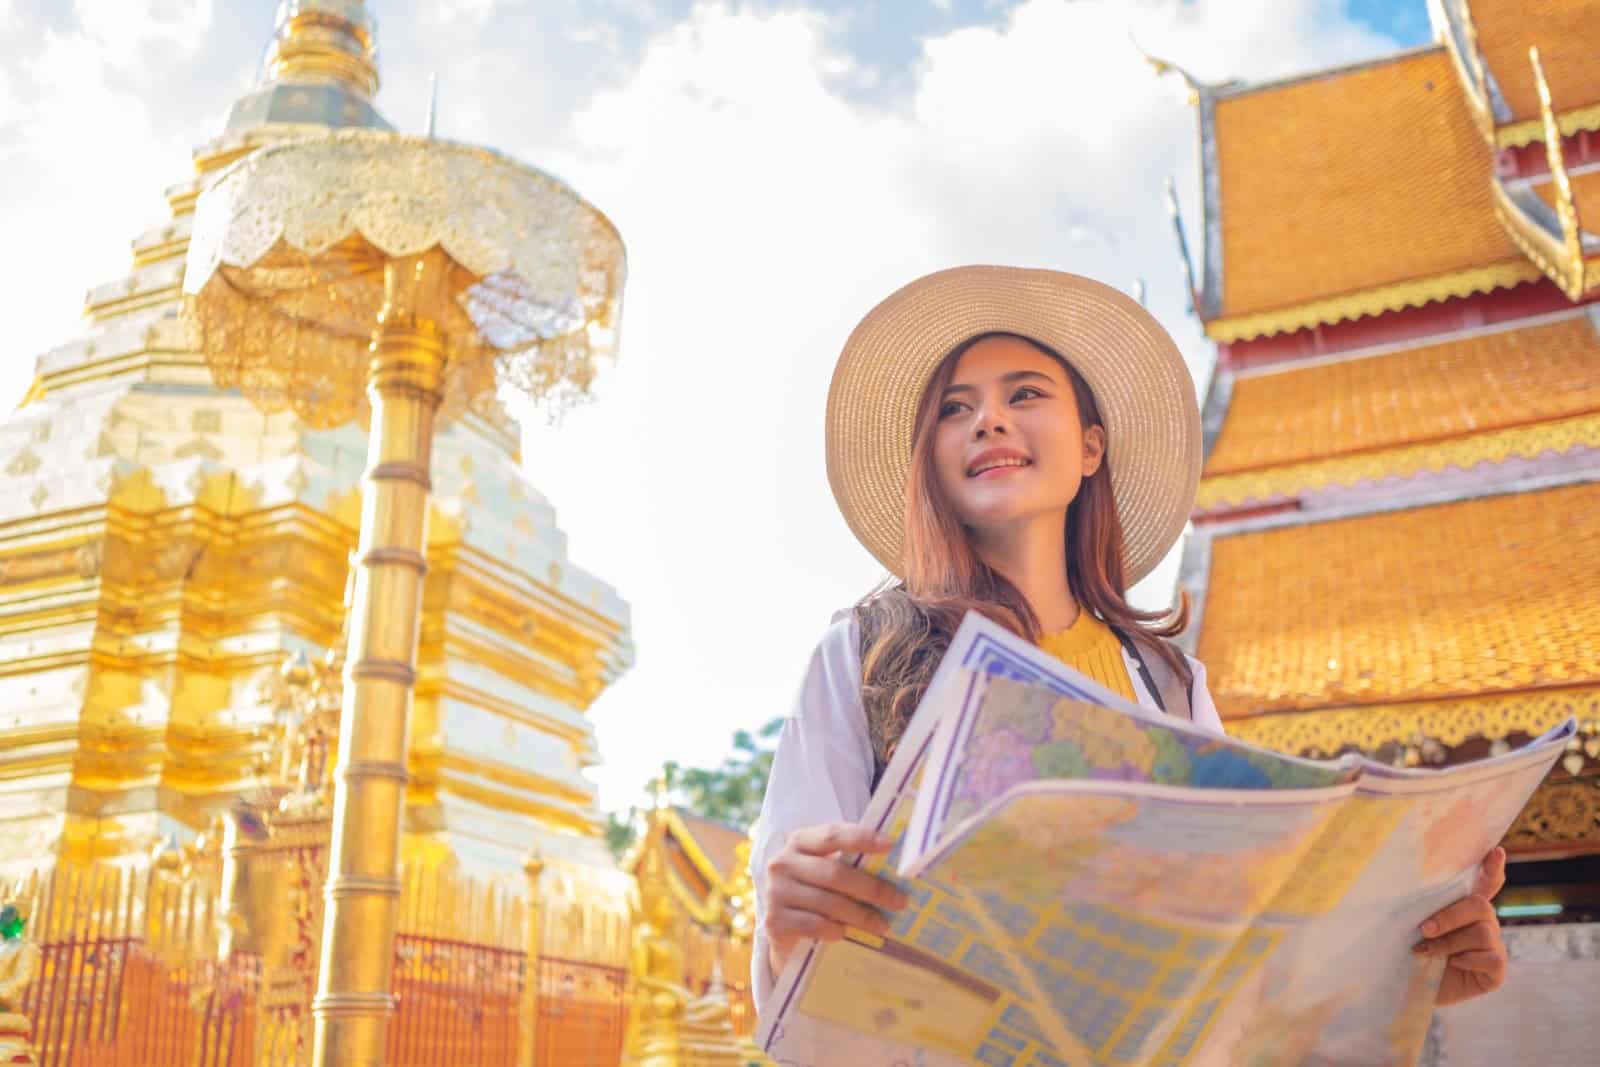 Image Credit: Shutterstock / I Believe I Can Fly <p><span>Chiang Mai is a haven for plant-based eaters, with its abundance of fresh fruits, vegetables, and a thriving vegan and vegetarian scene. The city’s Buddhist culture means that many locals also observe a plant-based diet, particularly during religious periods, making widely available and varied vegan-friendly dishes.</span></p> <p><span>From street food stalls offering mango sticky rice and papaya salad to upscale restaurants serving innovative plant-based cuisine, Chiang Mai is where vegans and vegetarians are spoilt for choice.</span></p> <p><b>Insider’s Tip: </b><span>Visit during the Thai Vegetarian Festival (usually in October), when even more vegan and vegetarian options are available as the city celebrates with special menus and street food stalls.</span></p>